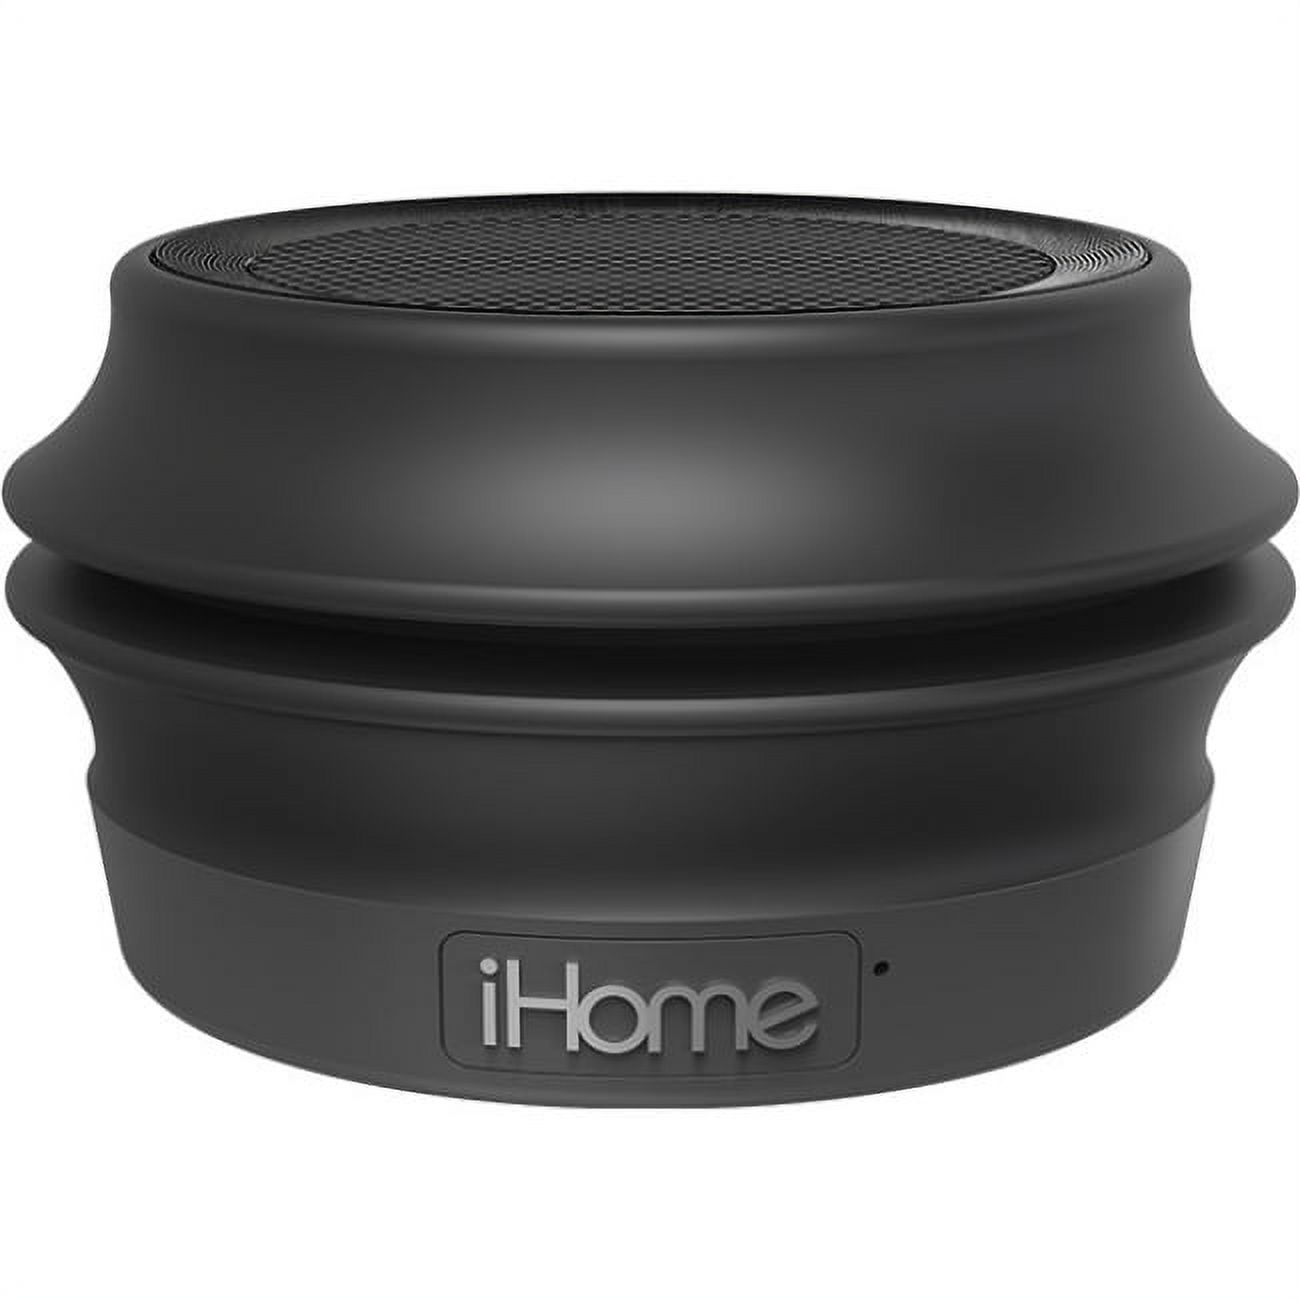 iHome Portable Bluetooth Speaker with Charges MP3 Player, Black, iBT61BC - image 2 of 2